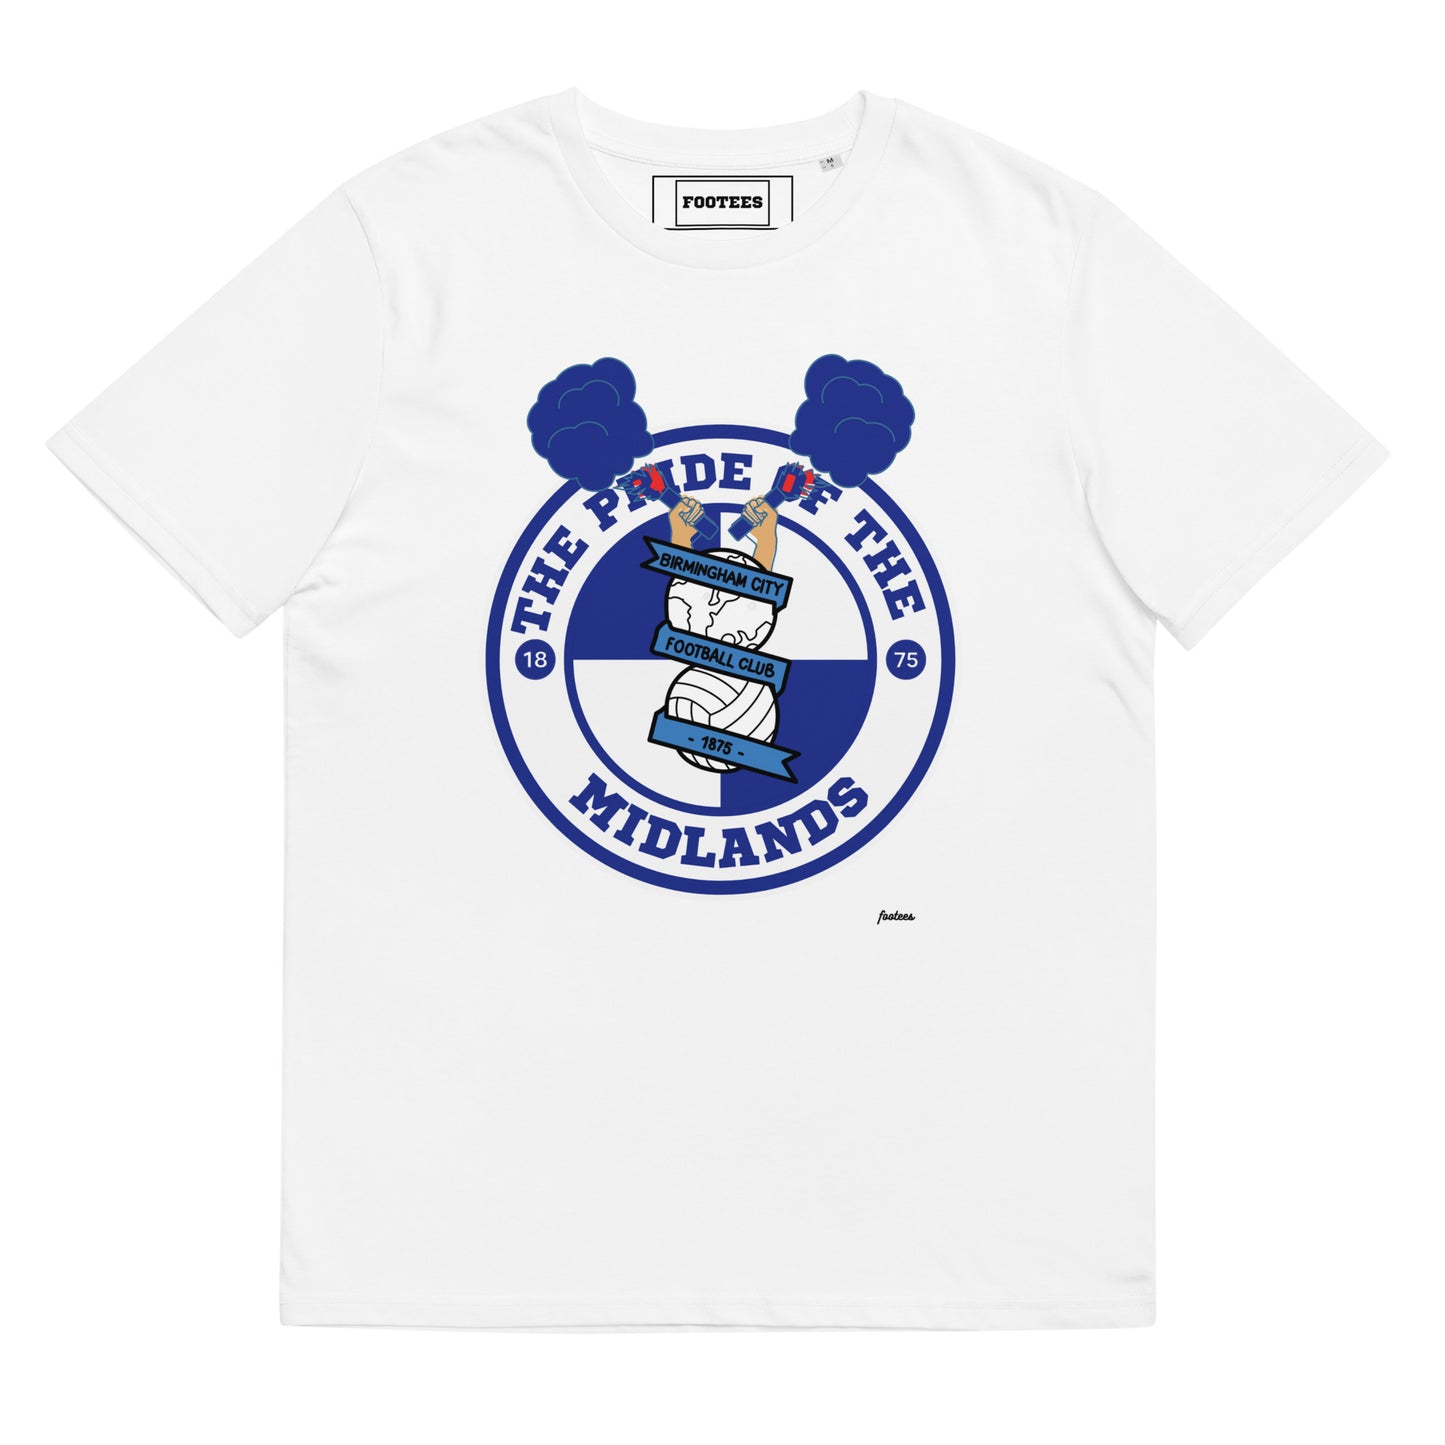 The Pride of the Midlands BCFC Tee